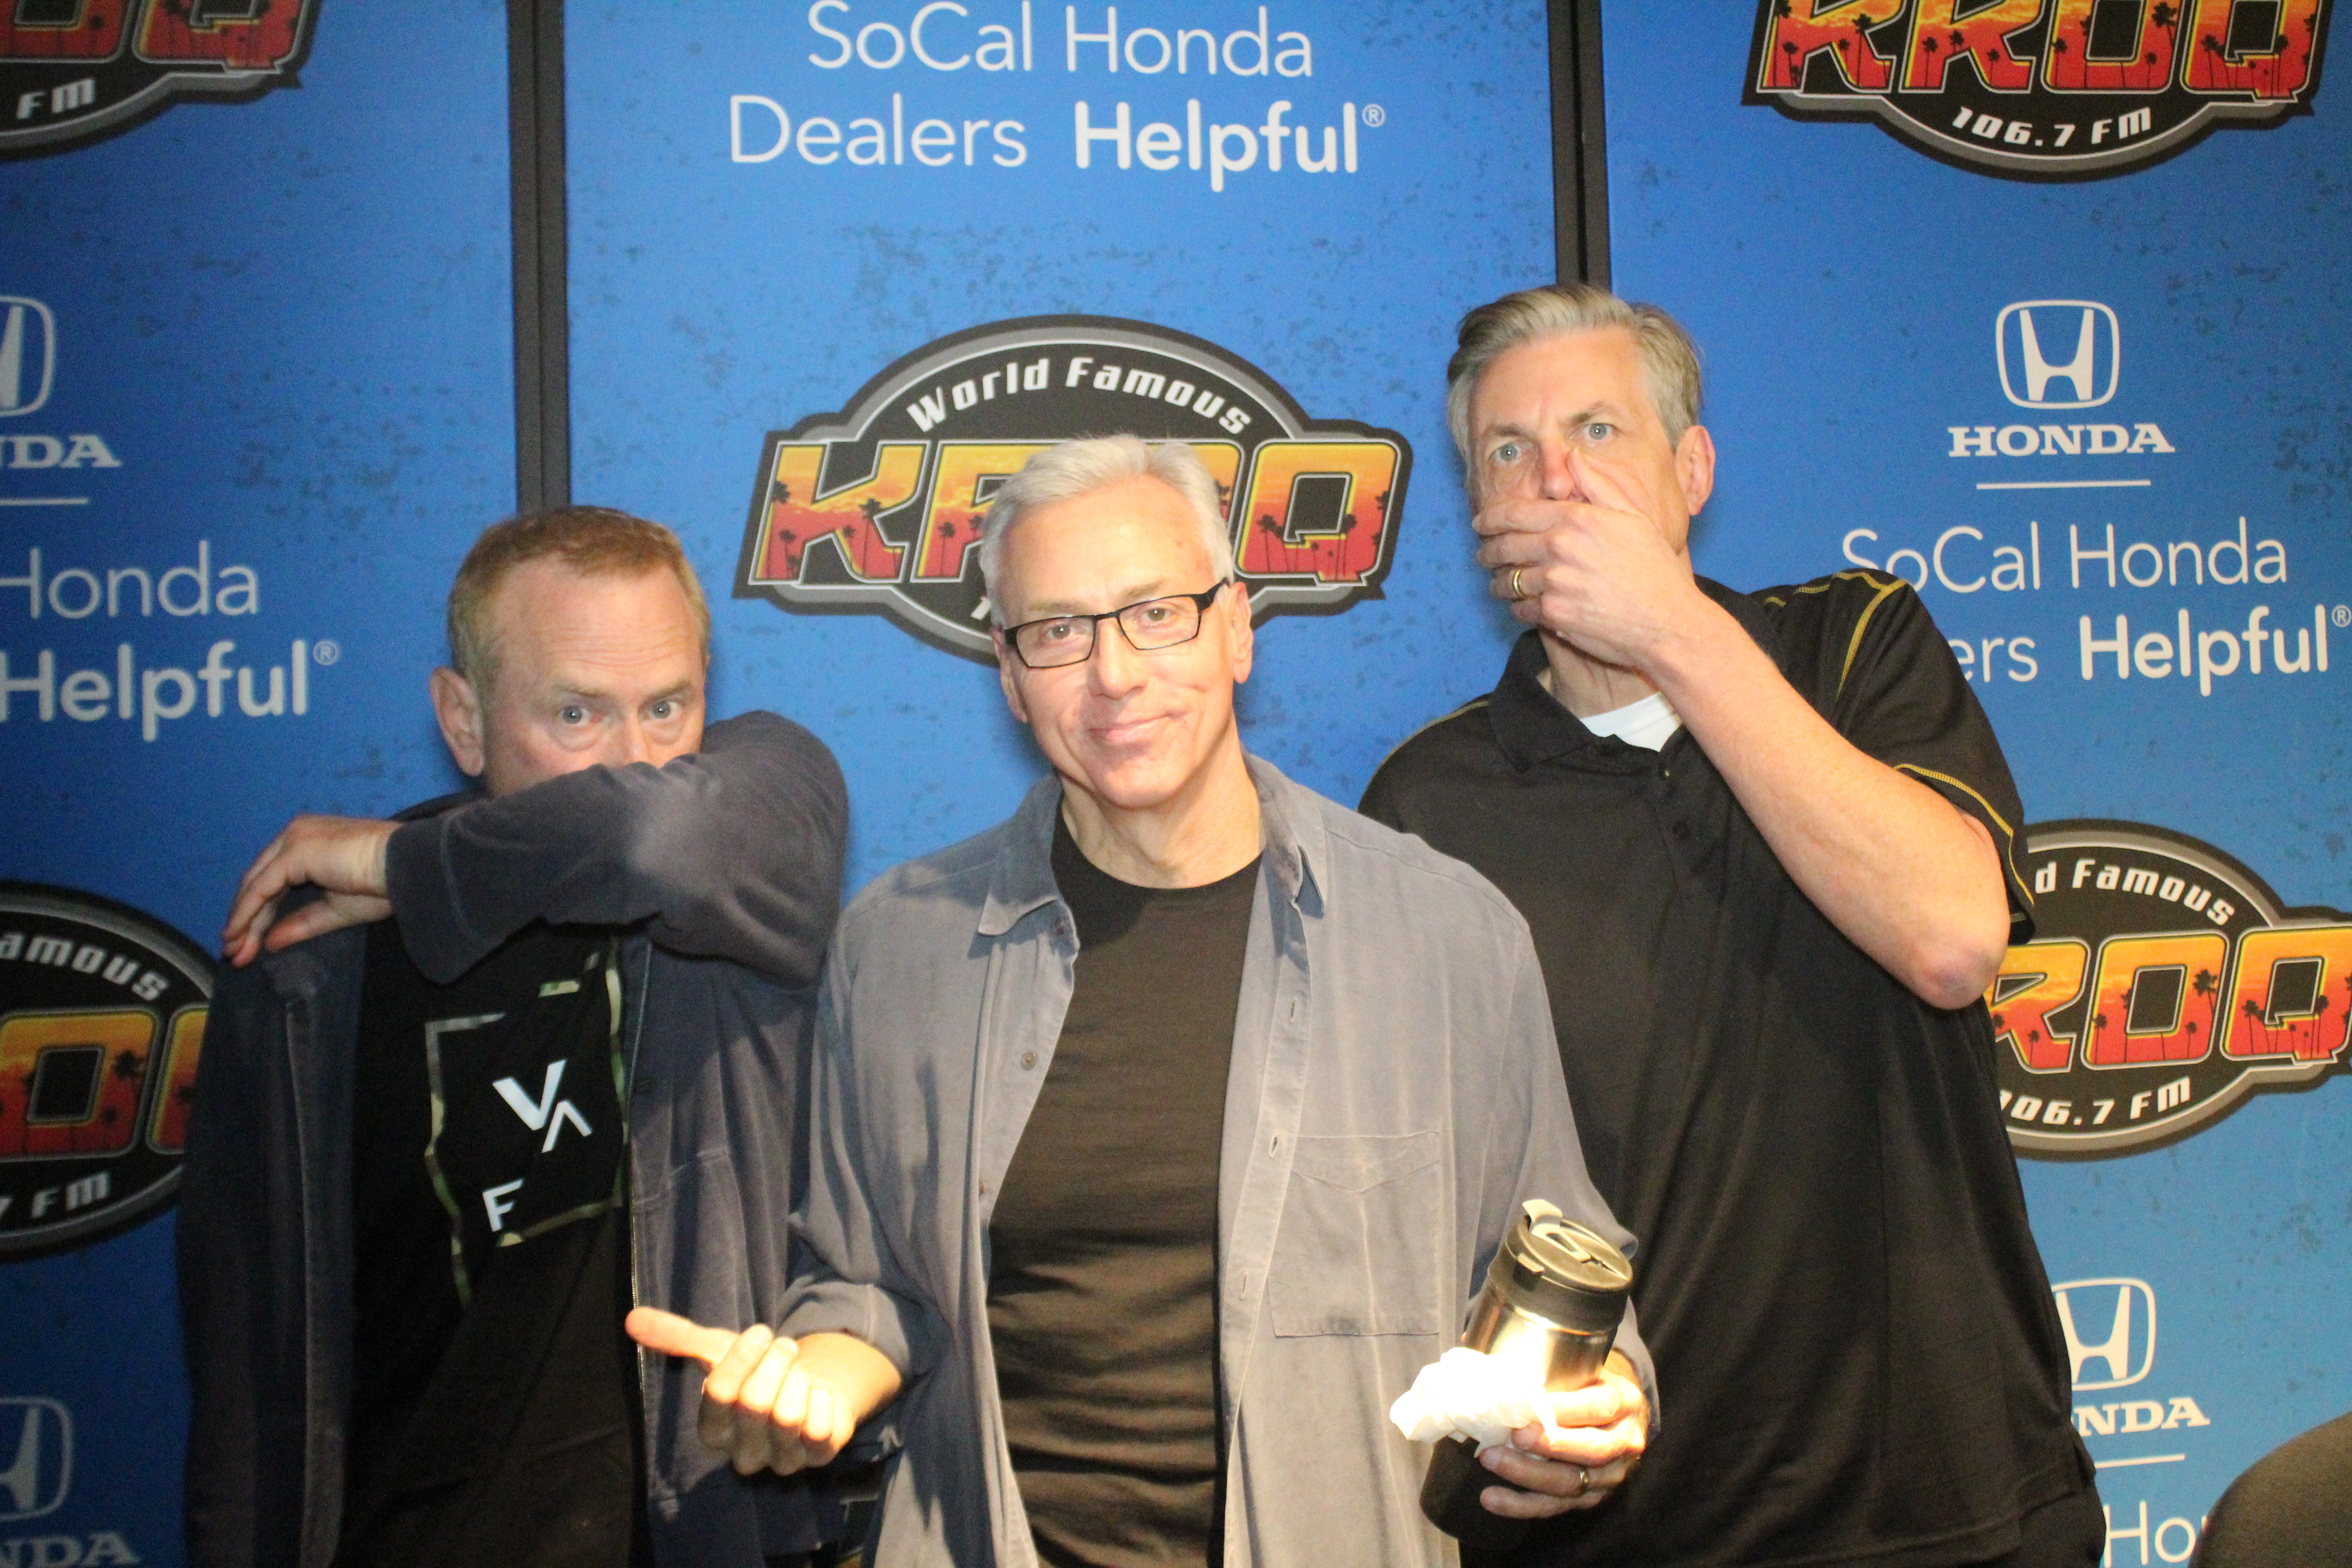 Thursday, February 7th with guests: Matt "Money" Smith and Dr. Drew